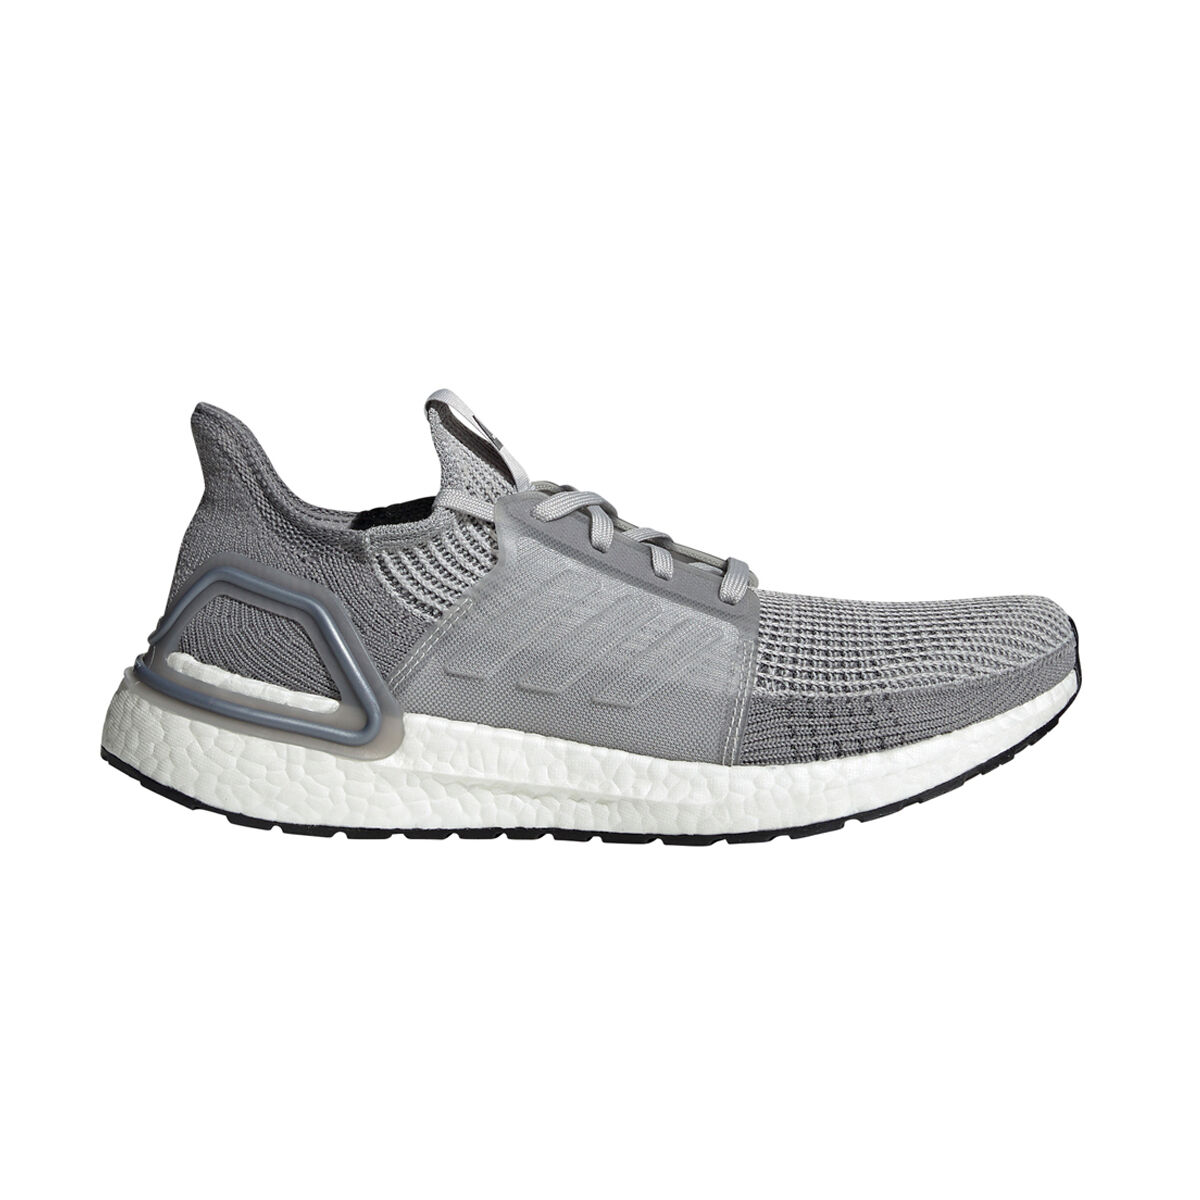 adidas energy boost mens running shoes